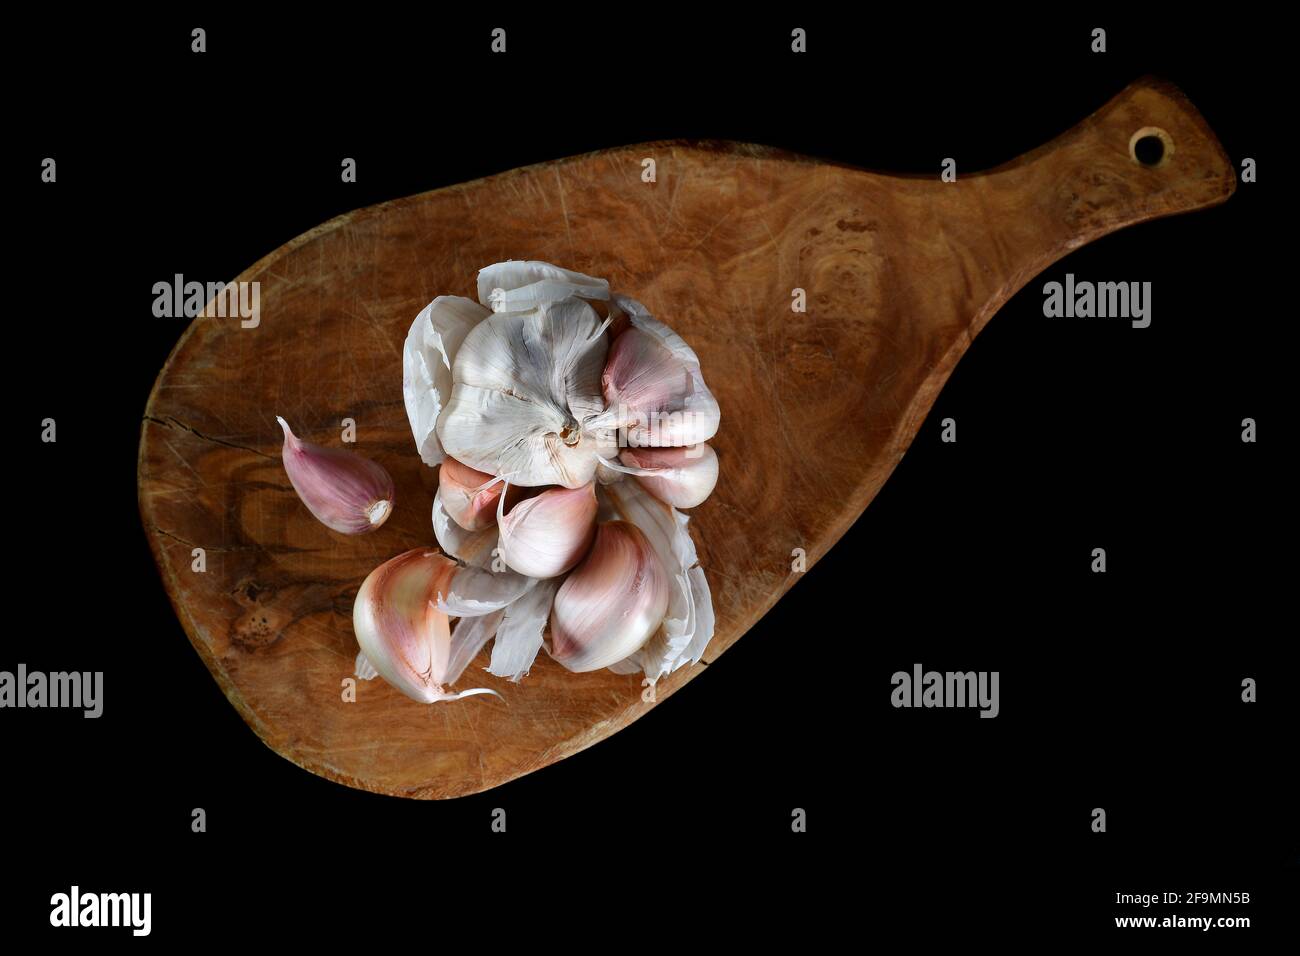 Image of garlic placed on cutting board studio isolated on dark background, view above Stock Photo